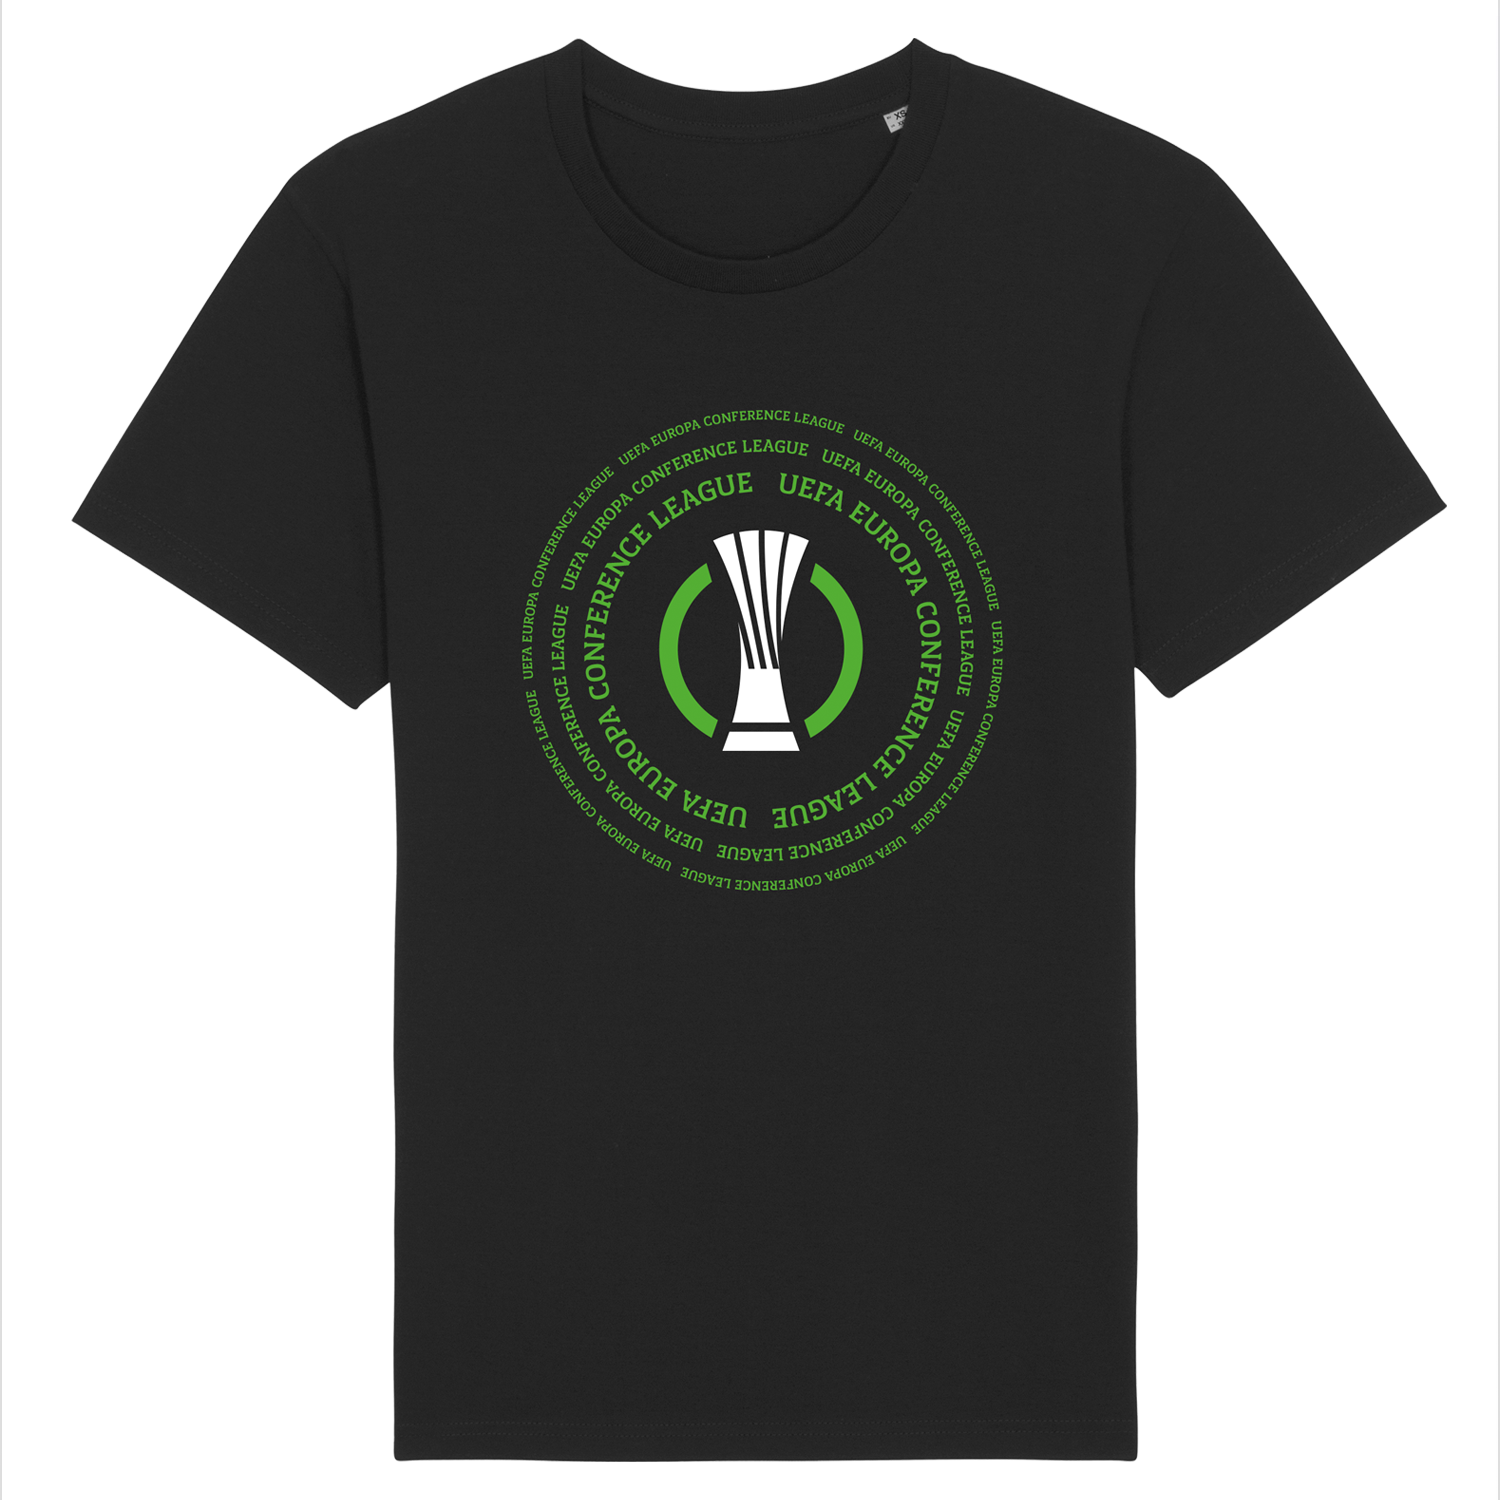 UEFA Europa Conference League - Roundel Black T-Shirt UEFA Club Competitions Online Store